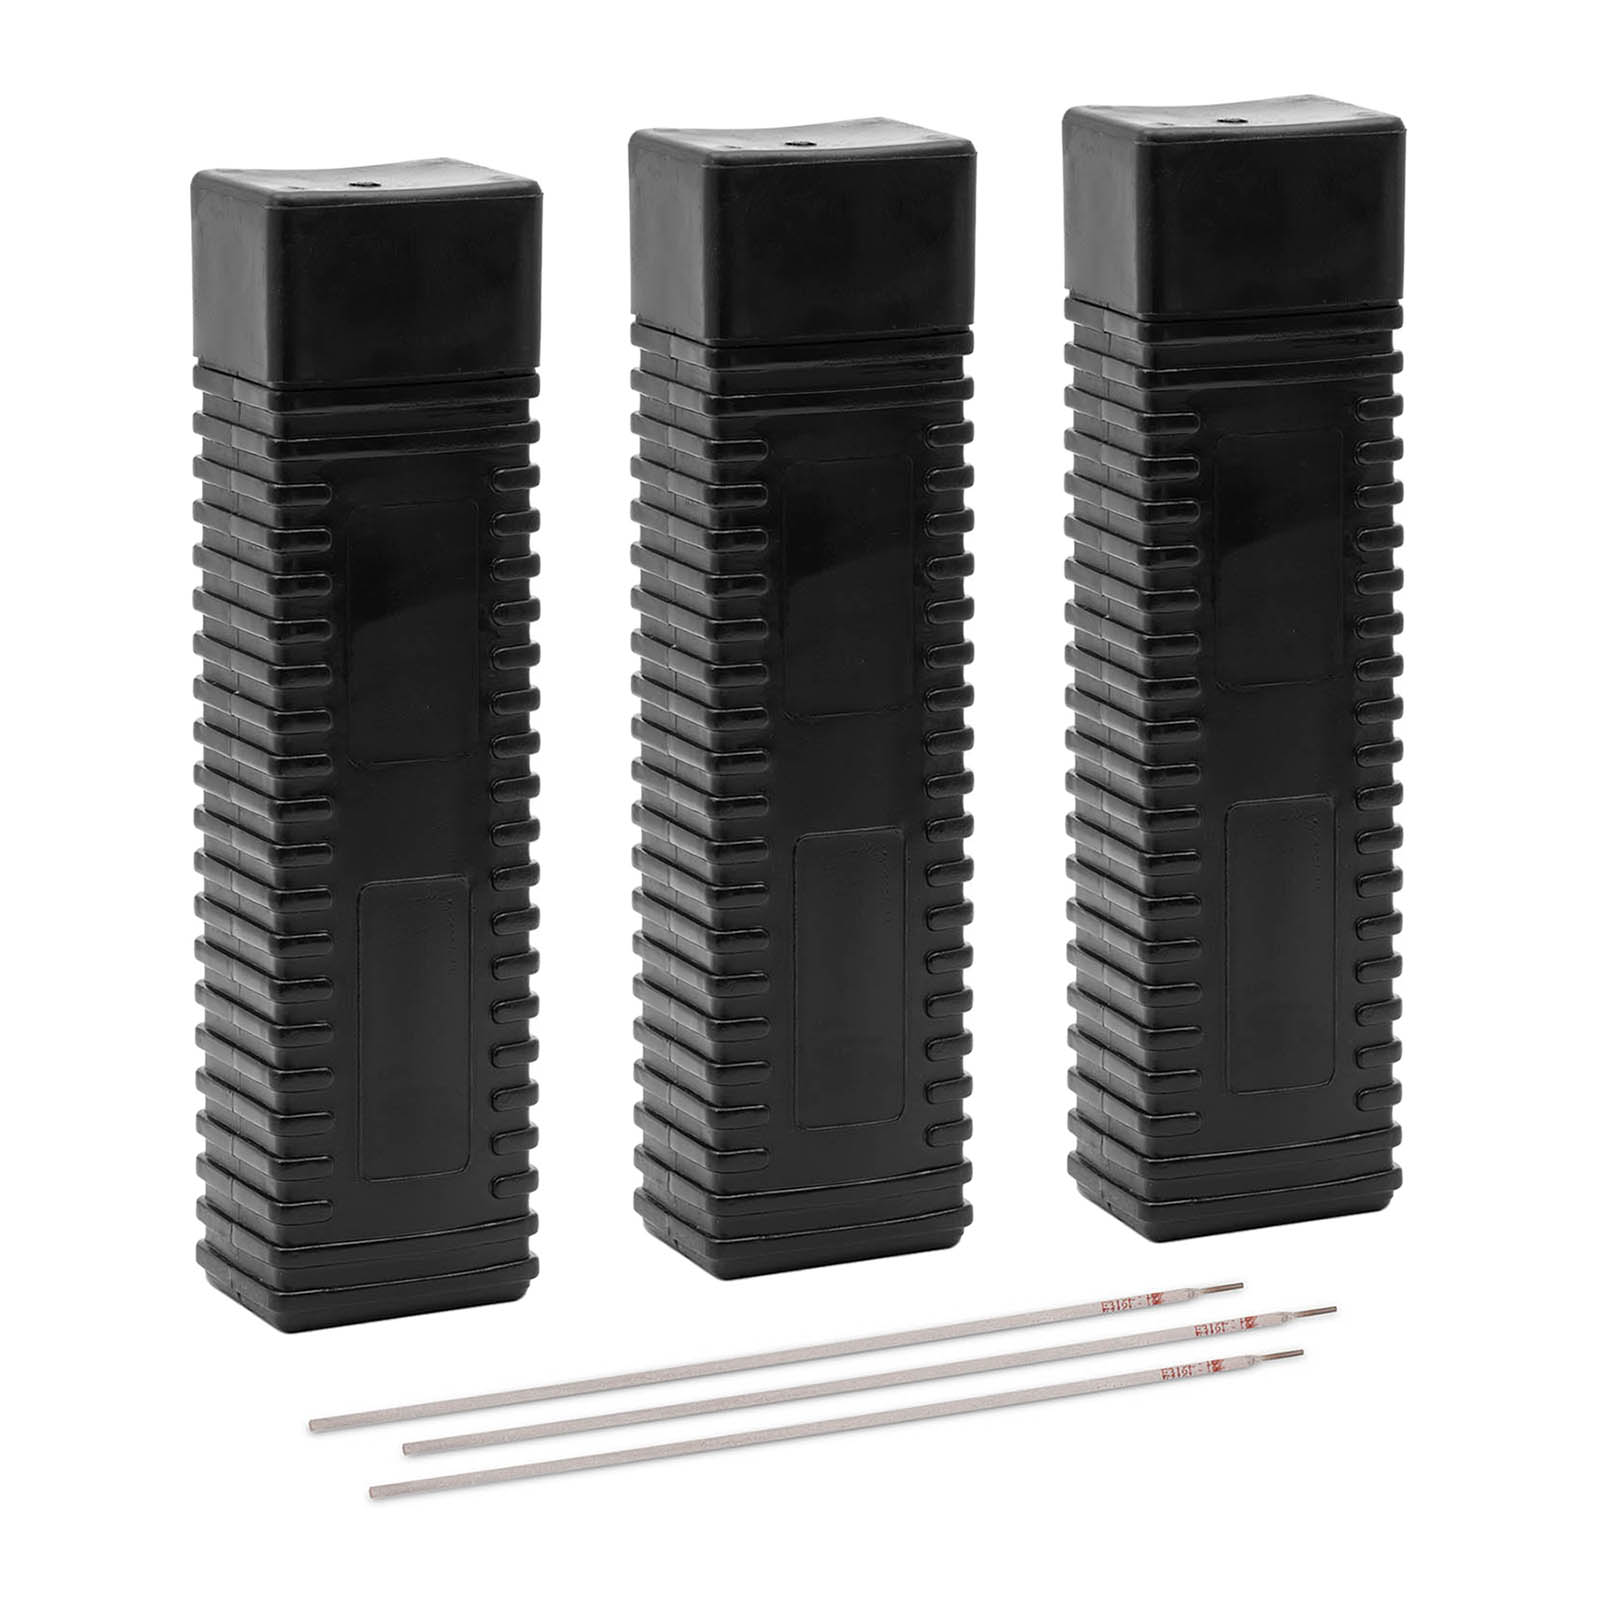 Set of 3 stick electrodes for stainless steels (AISI 301, 302, 304 and 308) - E308L-17 - rutile acid - 2.5 x 300 mm - 3 x 5 kg